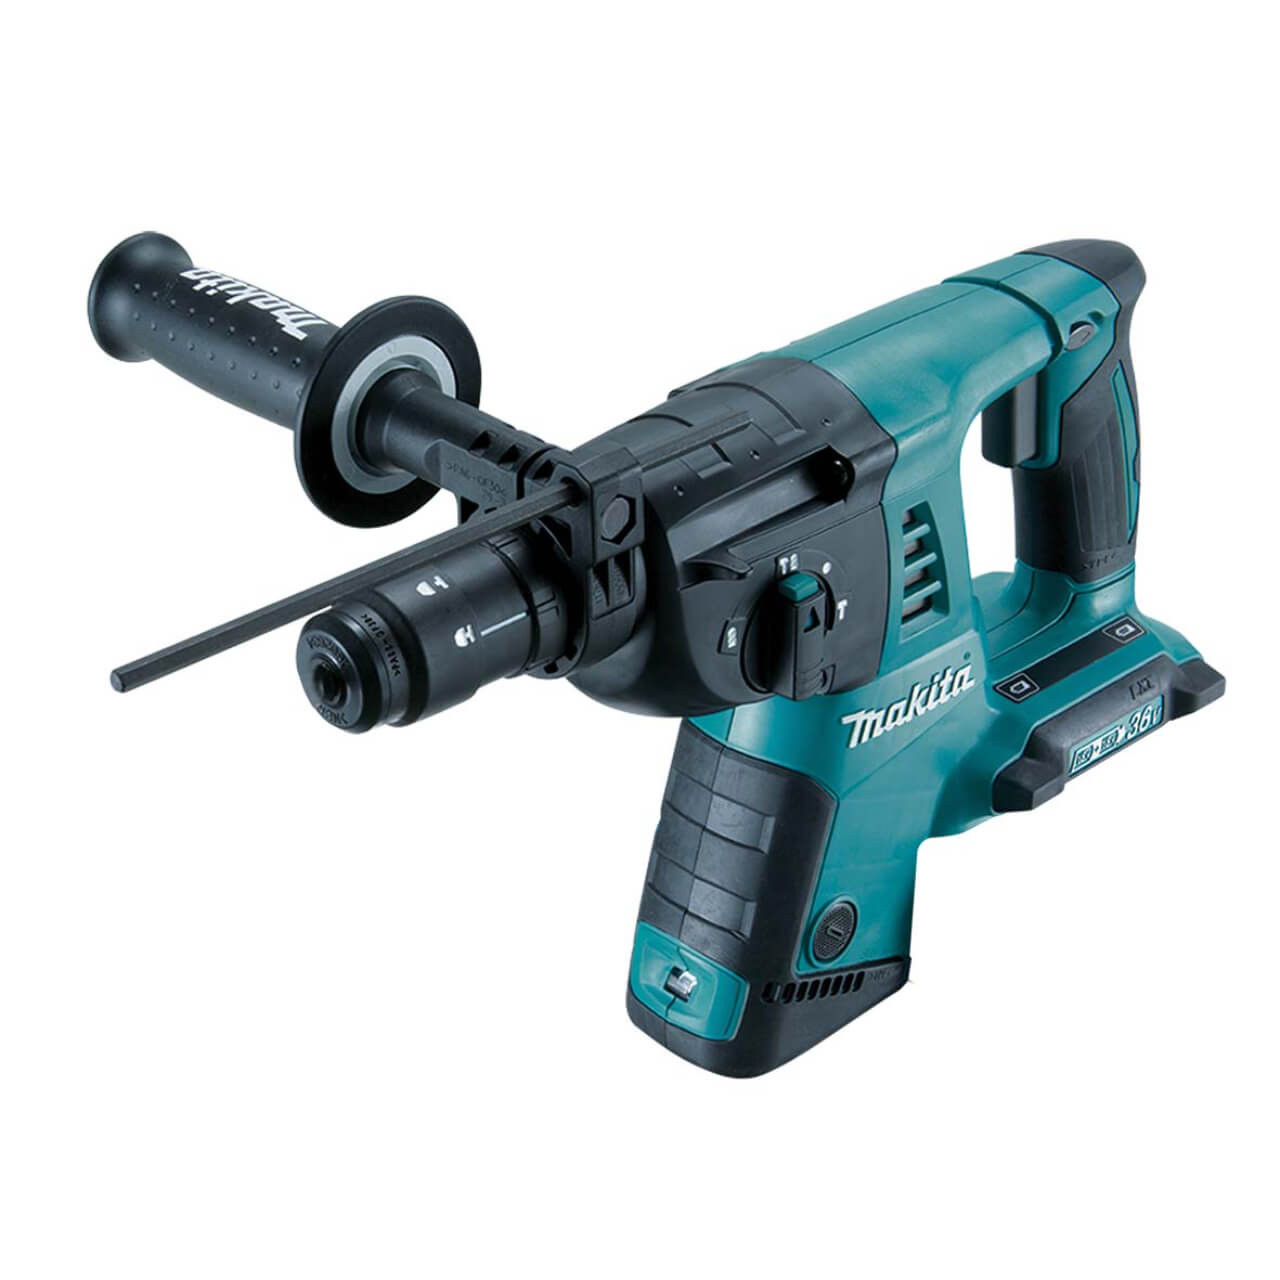 Makita 18Vx2 26mm SDS Plus Rotary Hammer. Quick Change Chuck - Tool Only